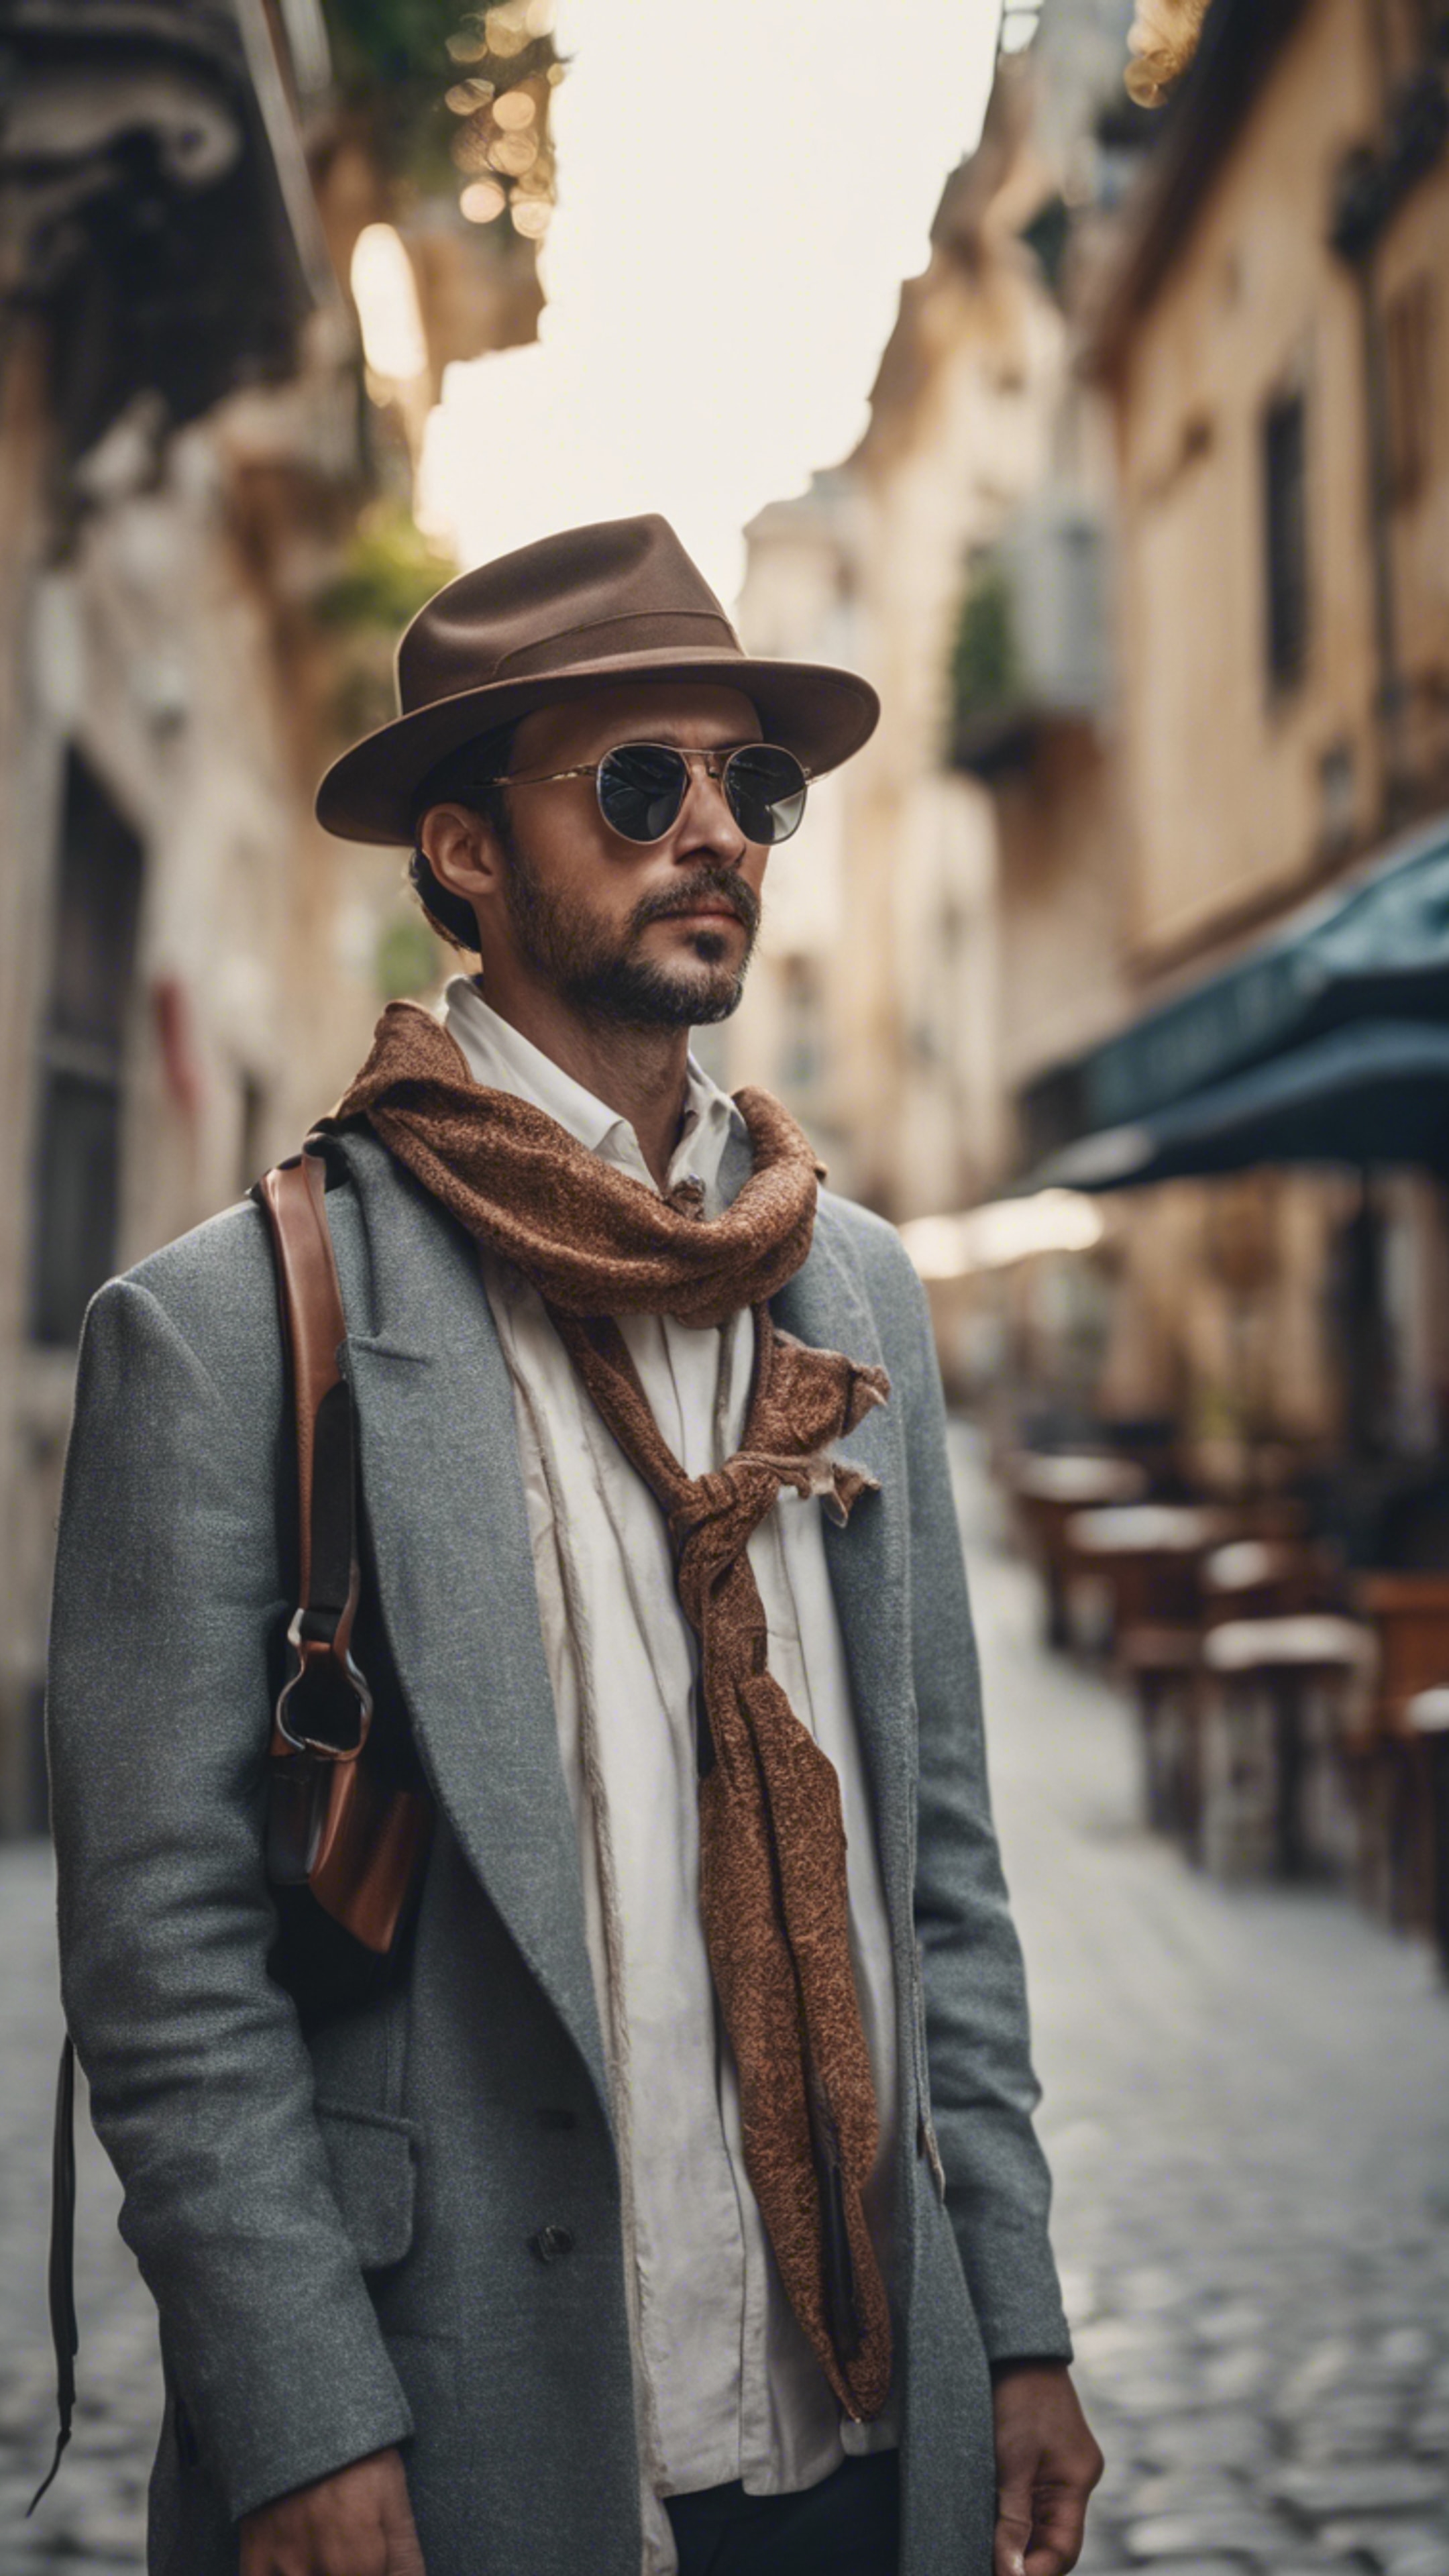 A man in a fashionable outfit with a camera around his neck wandering in a beautiful foreign city. Wallpaper[ec7e7192f25d407f8b2b]